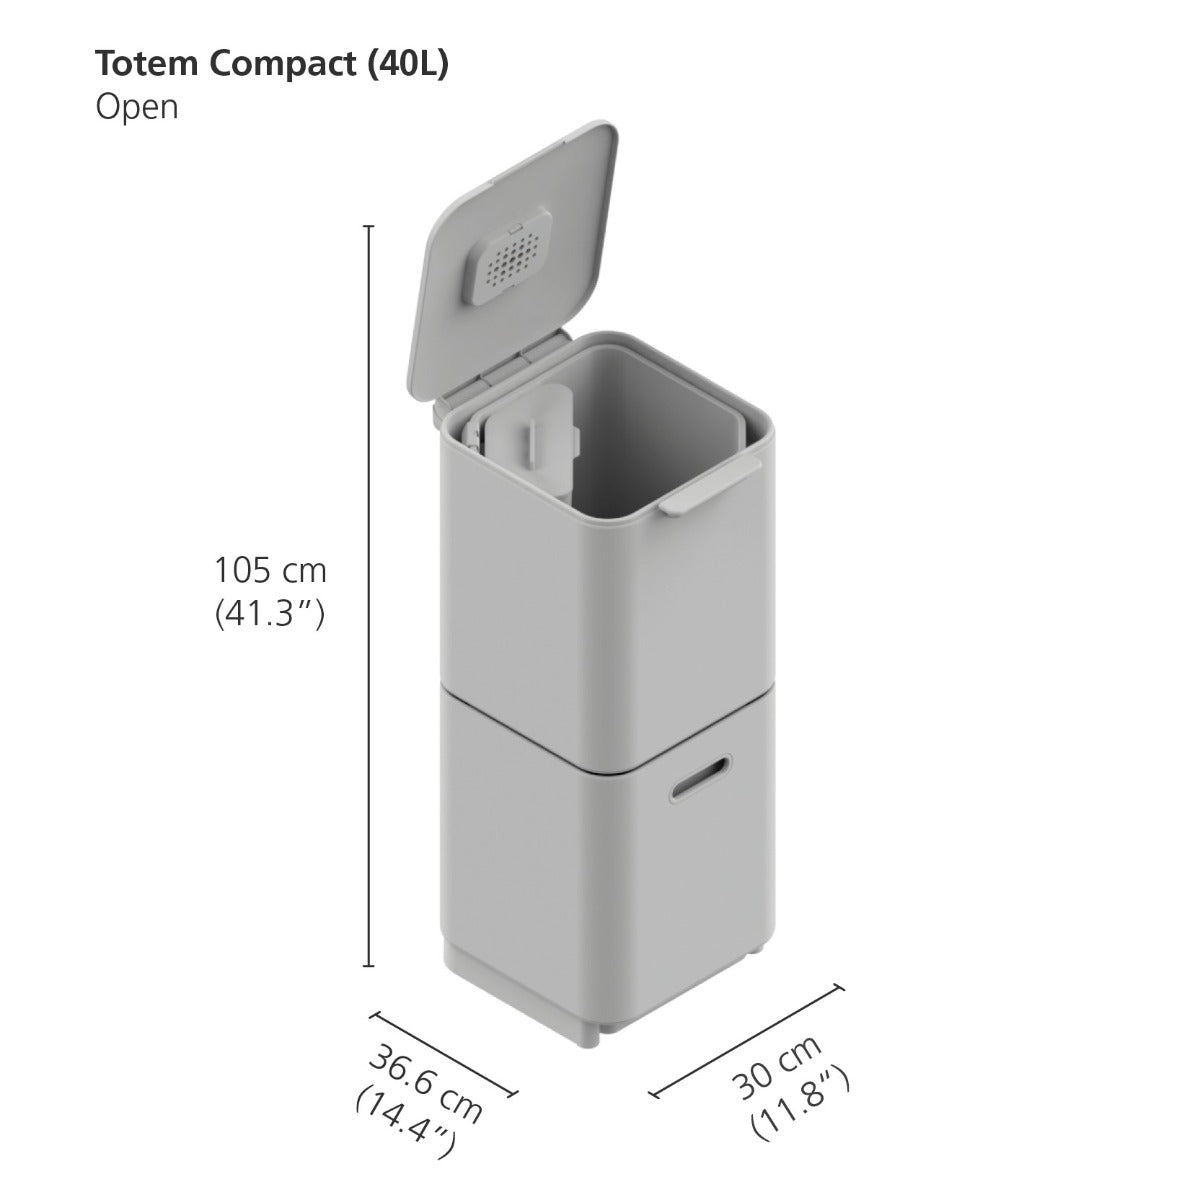 Joseph Joseph 3-Compartment Totem Compact 40L Recycling Bin: Stainless Steel